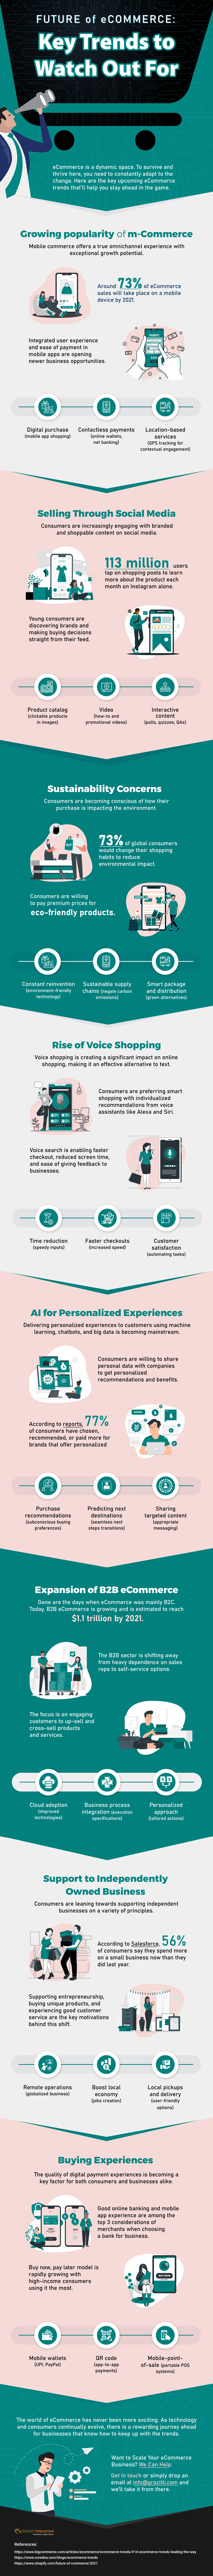 future ecommerce trends to watch out for infographic